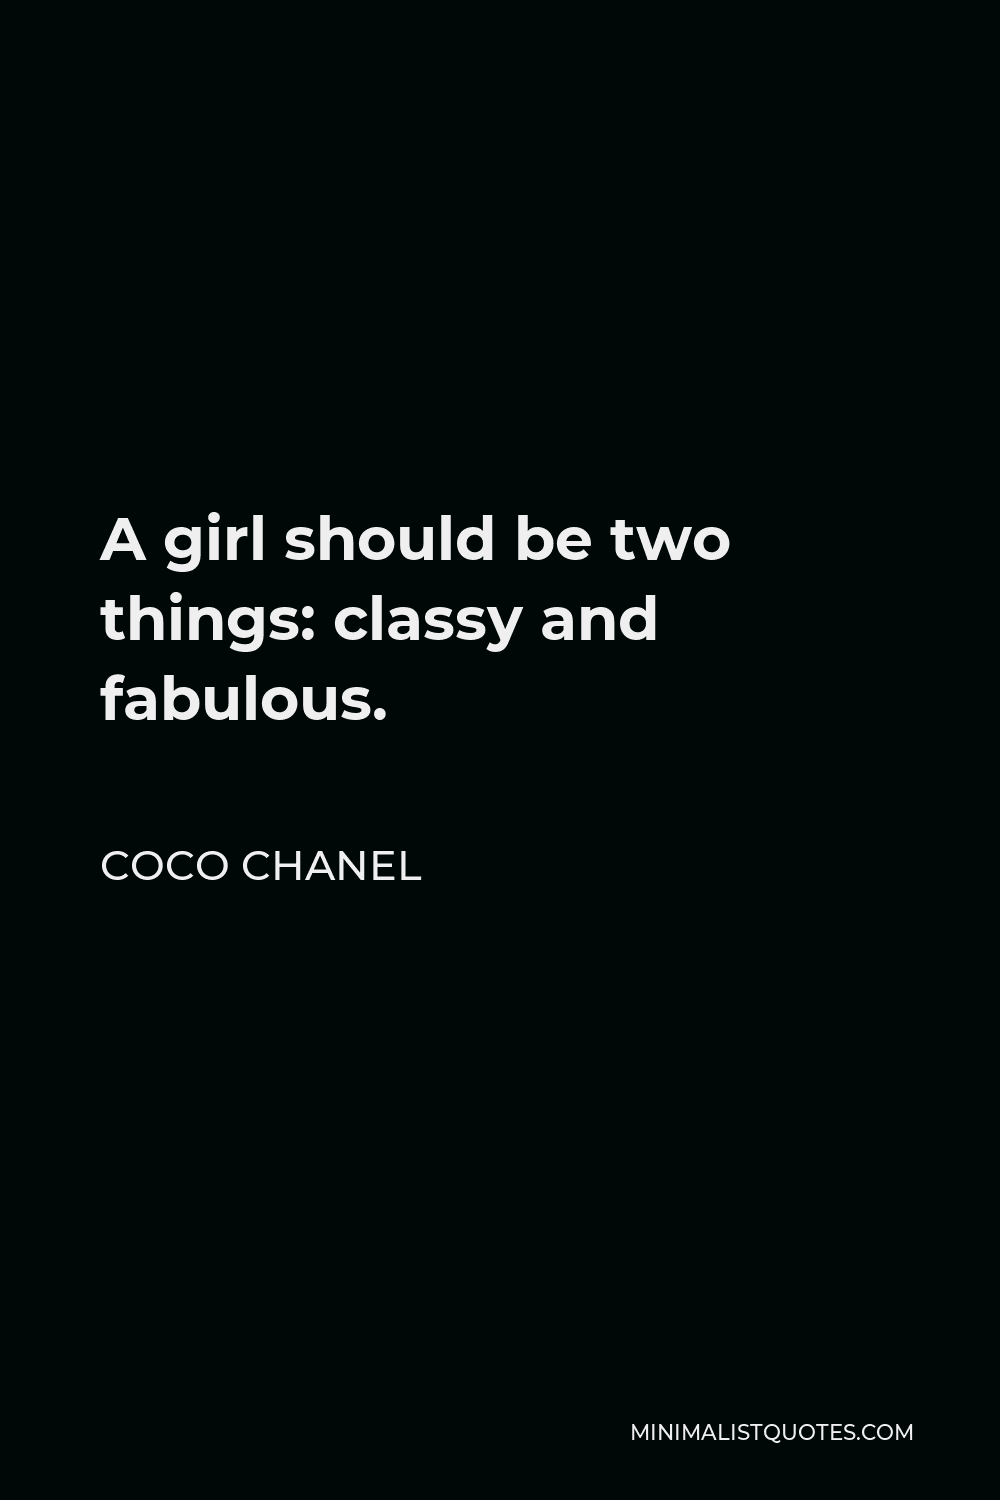 Coco Chanel Quote: A girl should be two things: classy and fabulous.